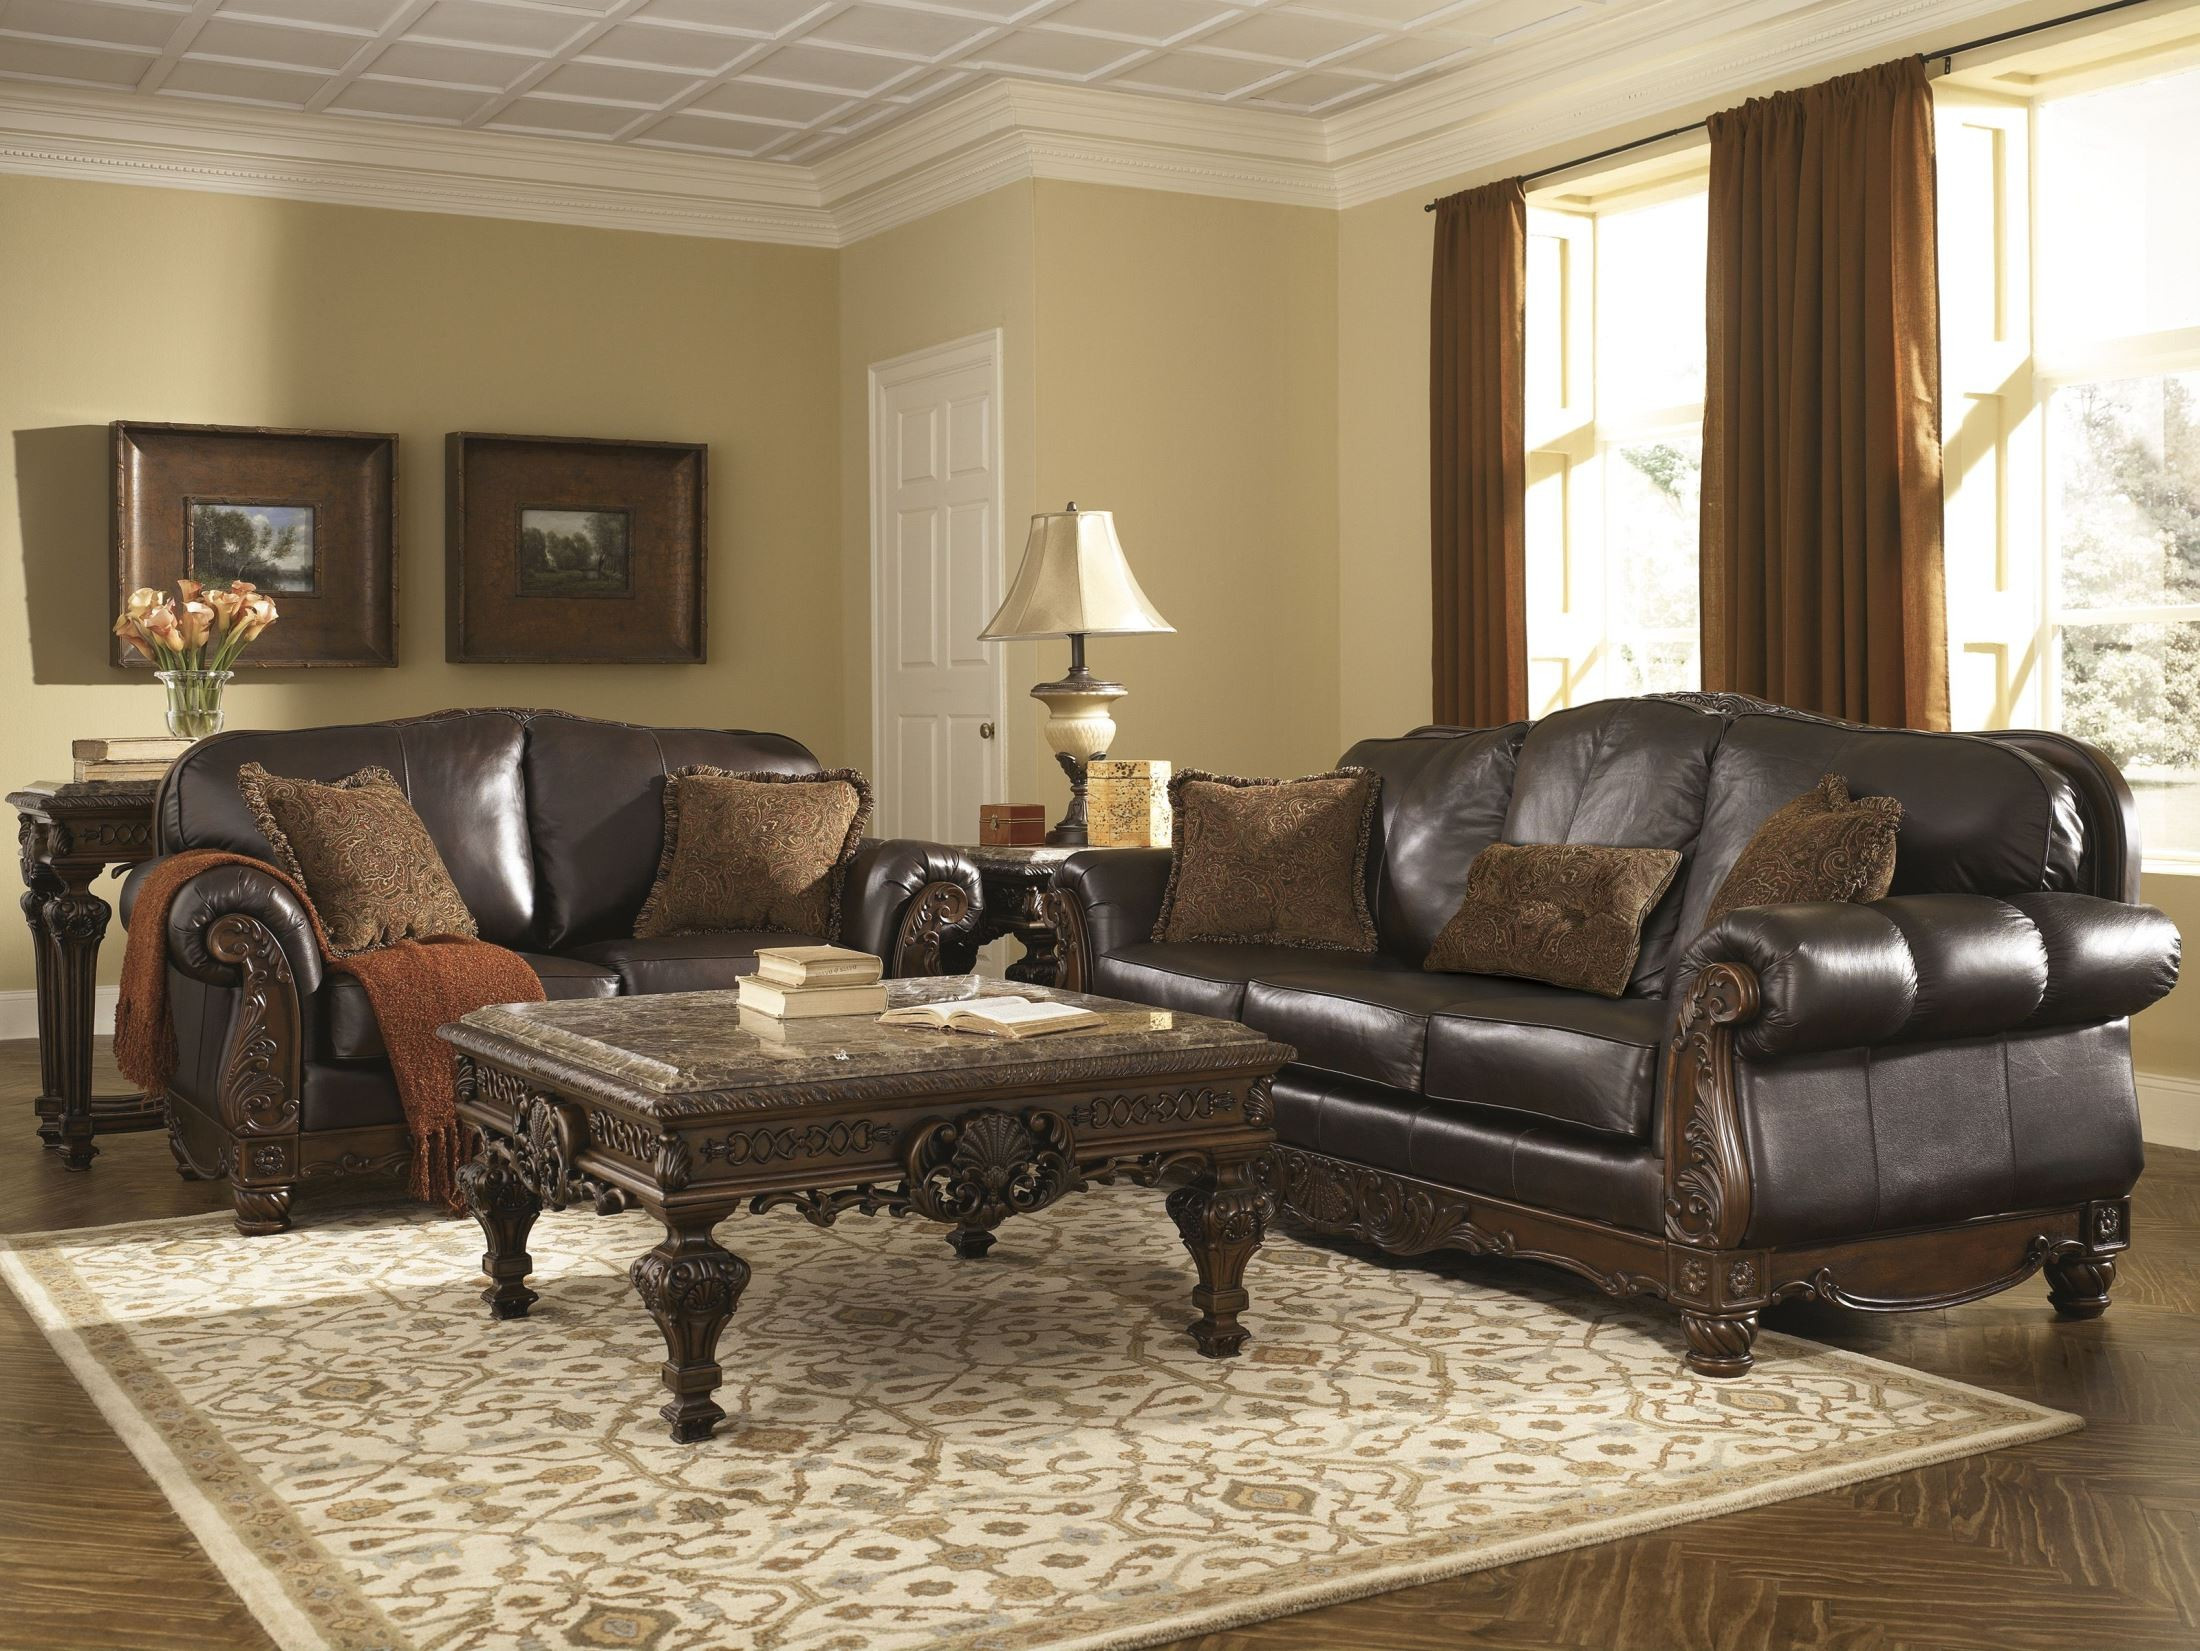 Brown Living Room Chairs
 North Shore Dark Brown Living Room Set from Ashley